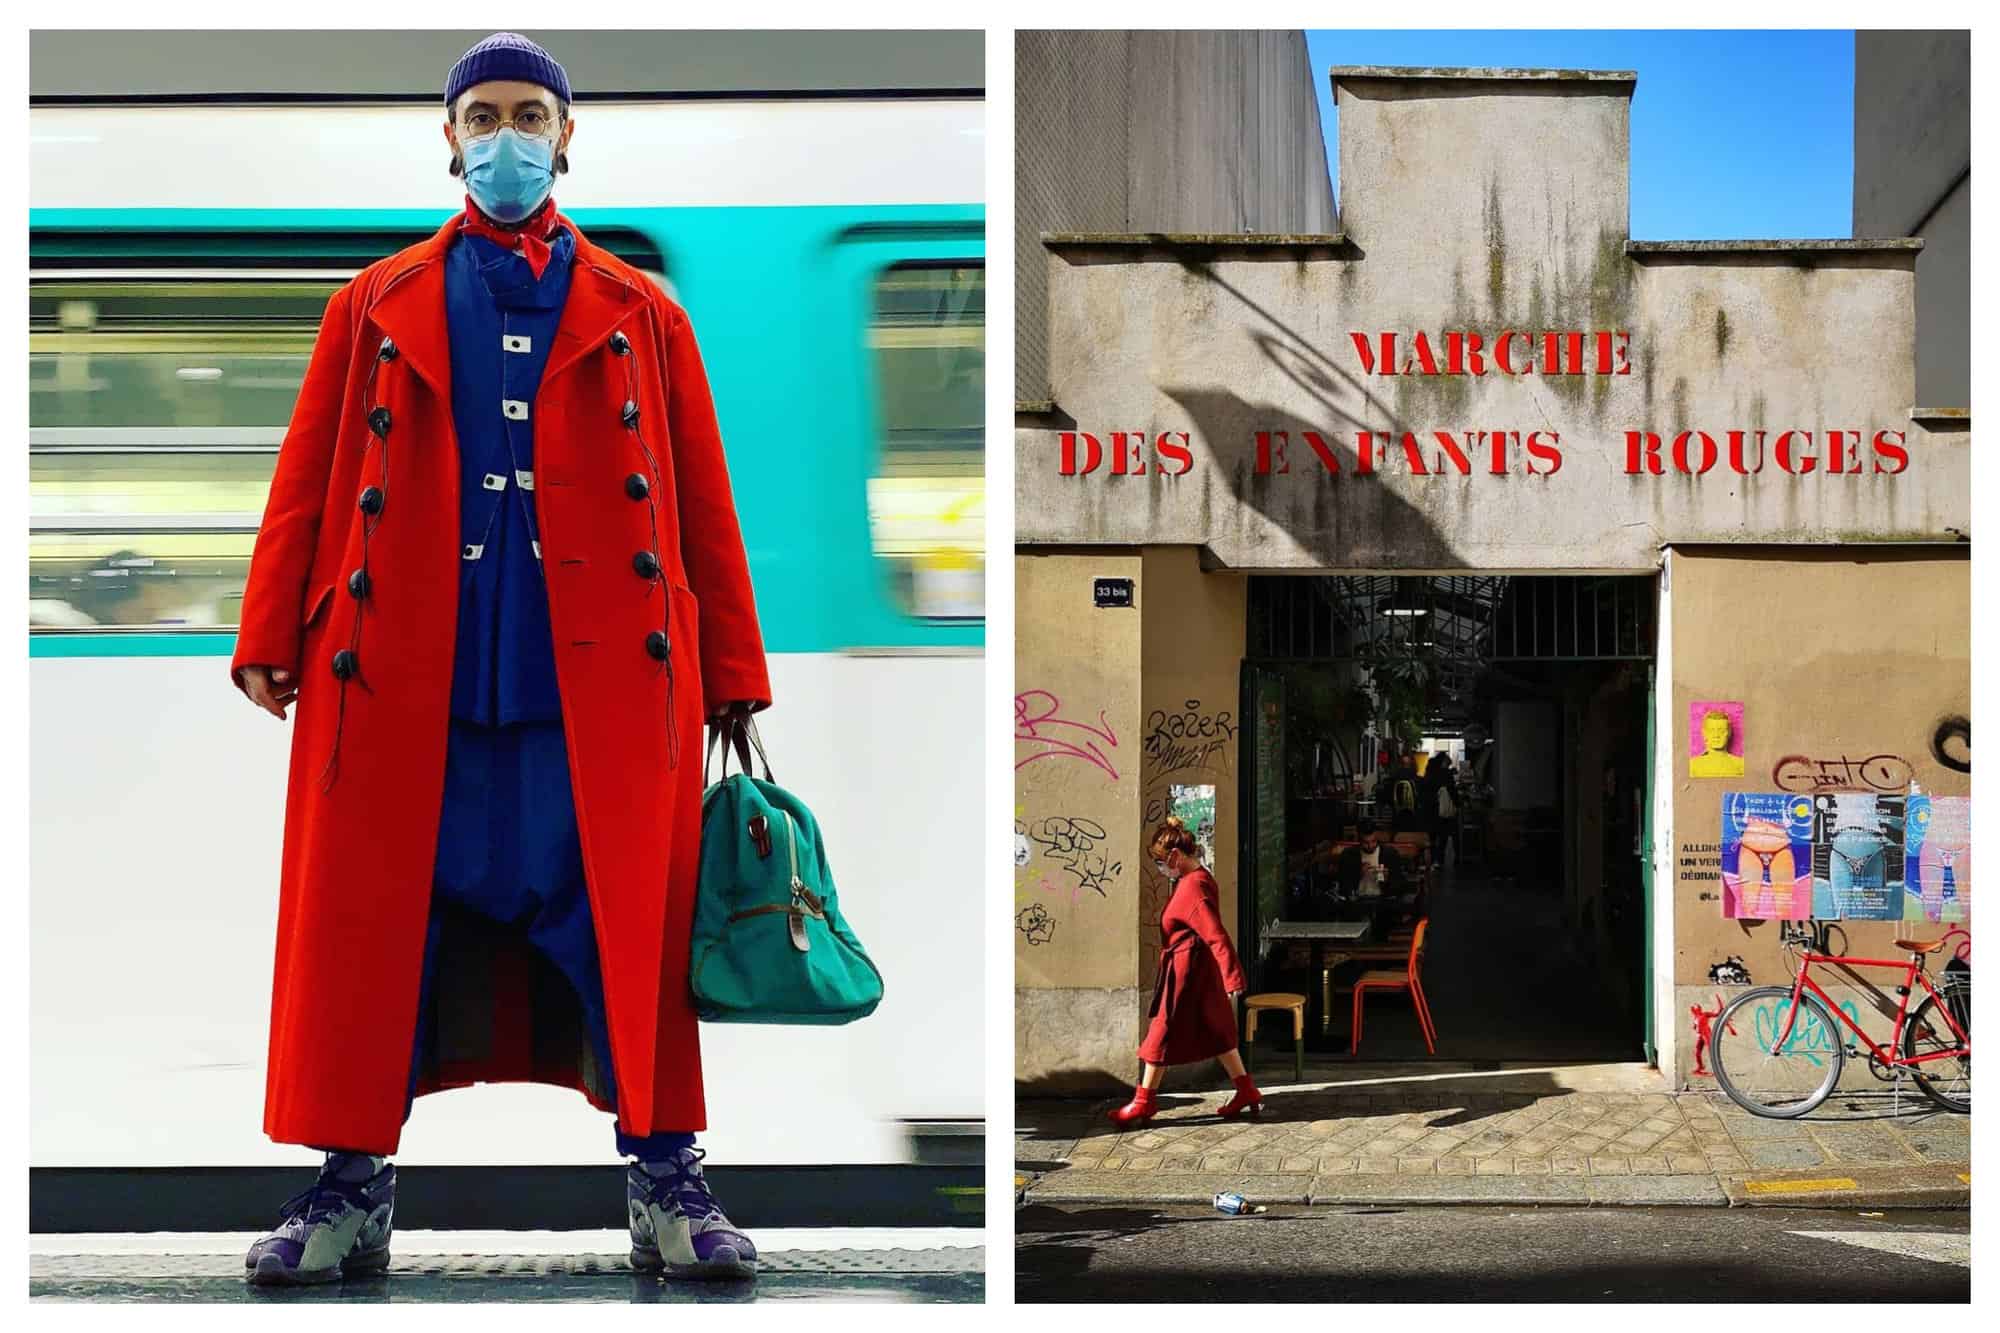 Left: Fashion design director Adrian Appiolaza is captured in a Métro platform with the green-and-white subway train blazing behind. He is wearing an oversized red coat with a an blue jumpsuit and a green bag. Right: A picture of the famous covered market in Le Marais called Marché des Enfants Rouges. It is home to fresh produce, flowers, and restaurants.